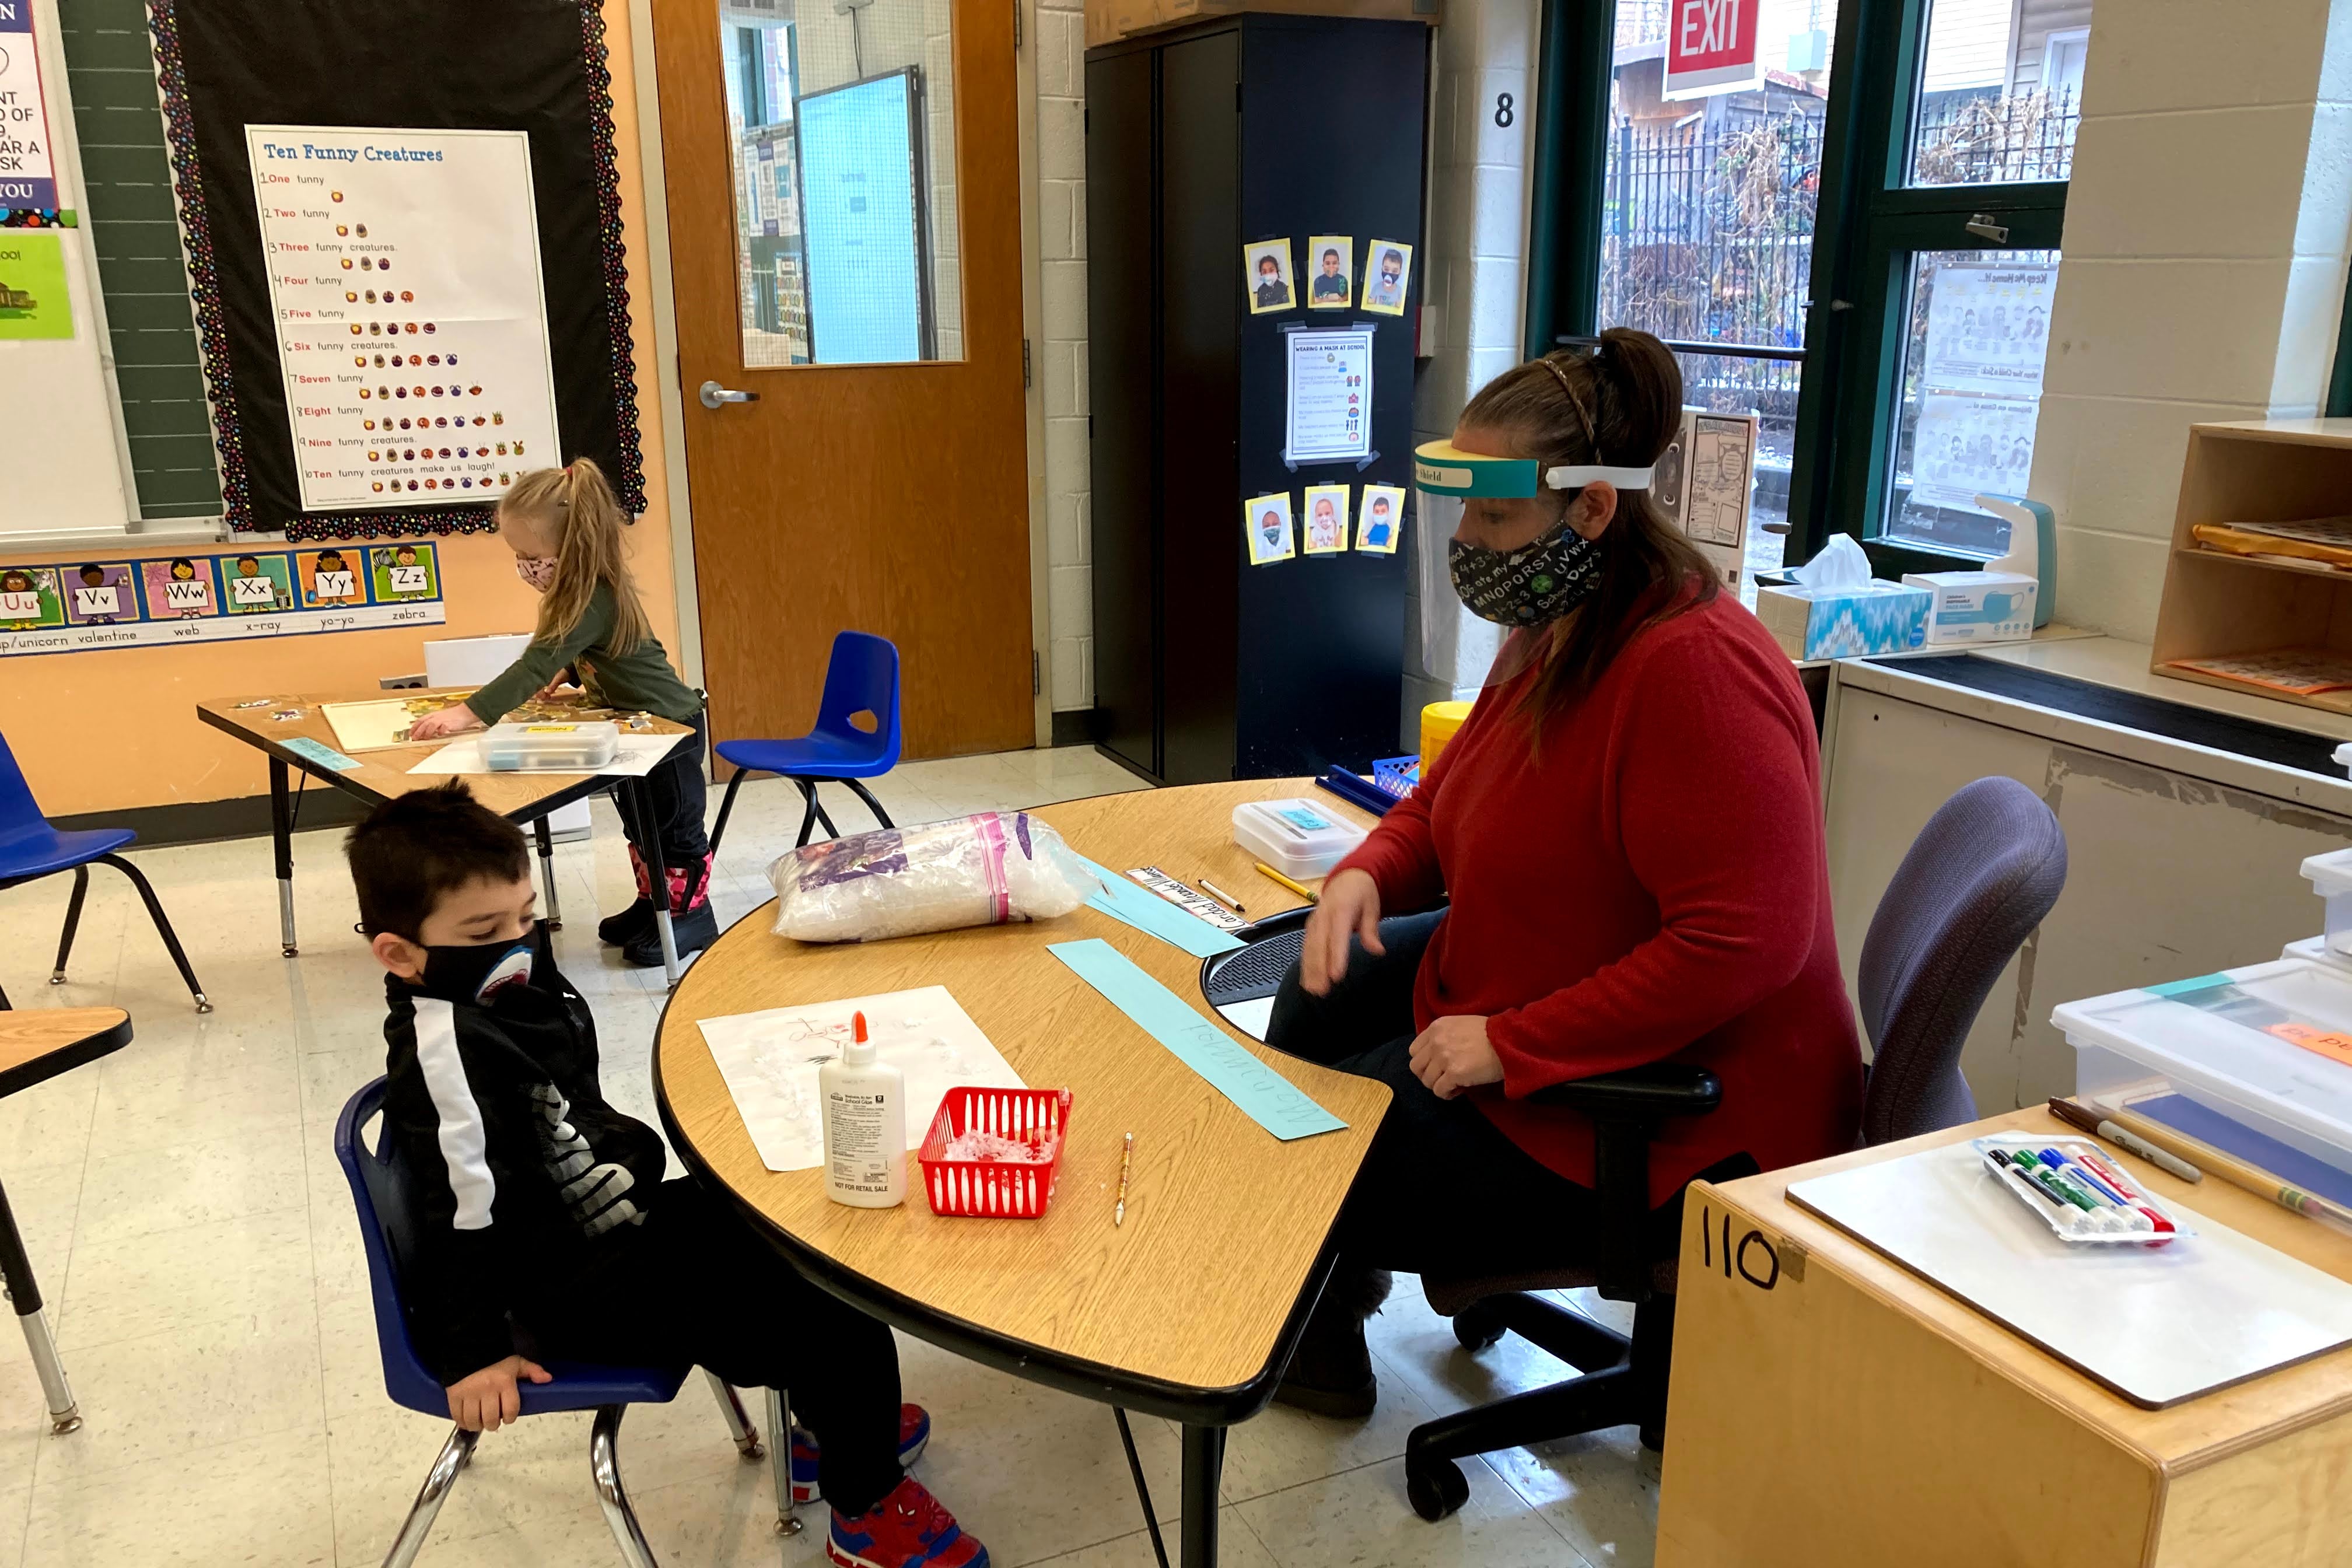 Masked teacher and masked student face each other across a semicircular desk in a classroom.